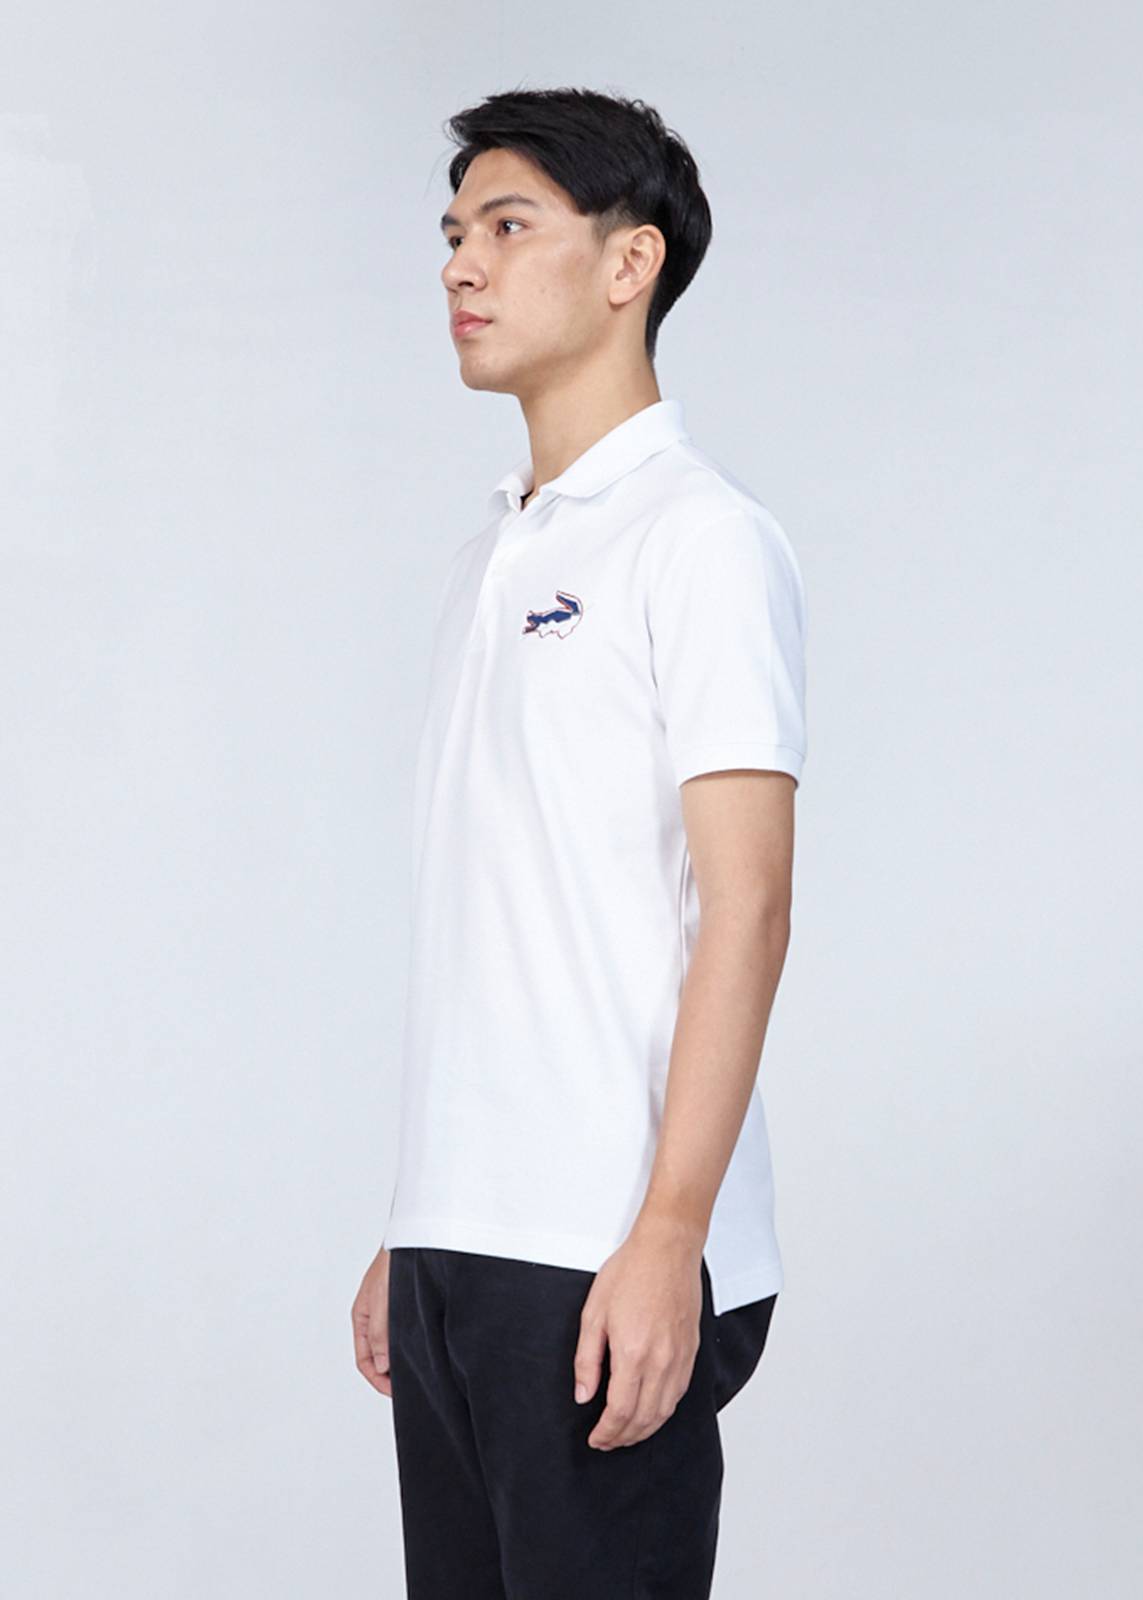 WHITE CUSTOM FIT POLO SHIRT WITH EMBROIDERED LOGO